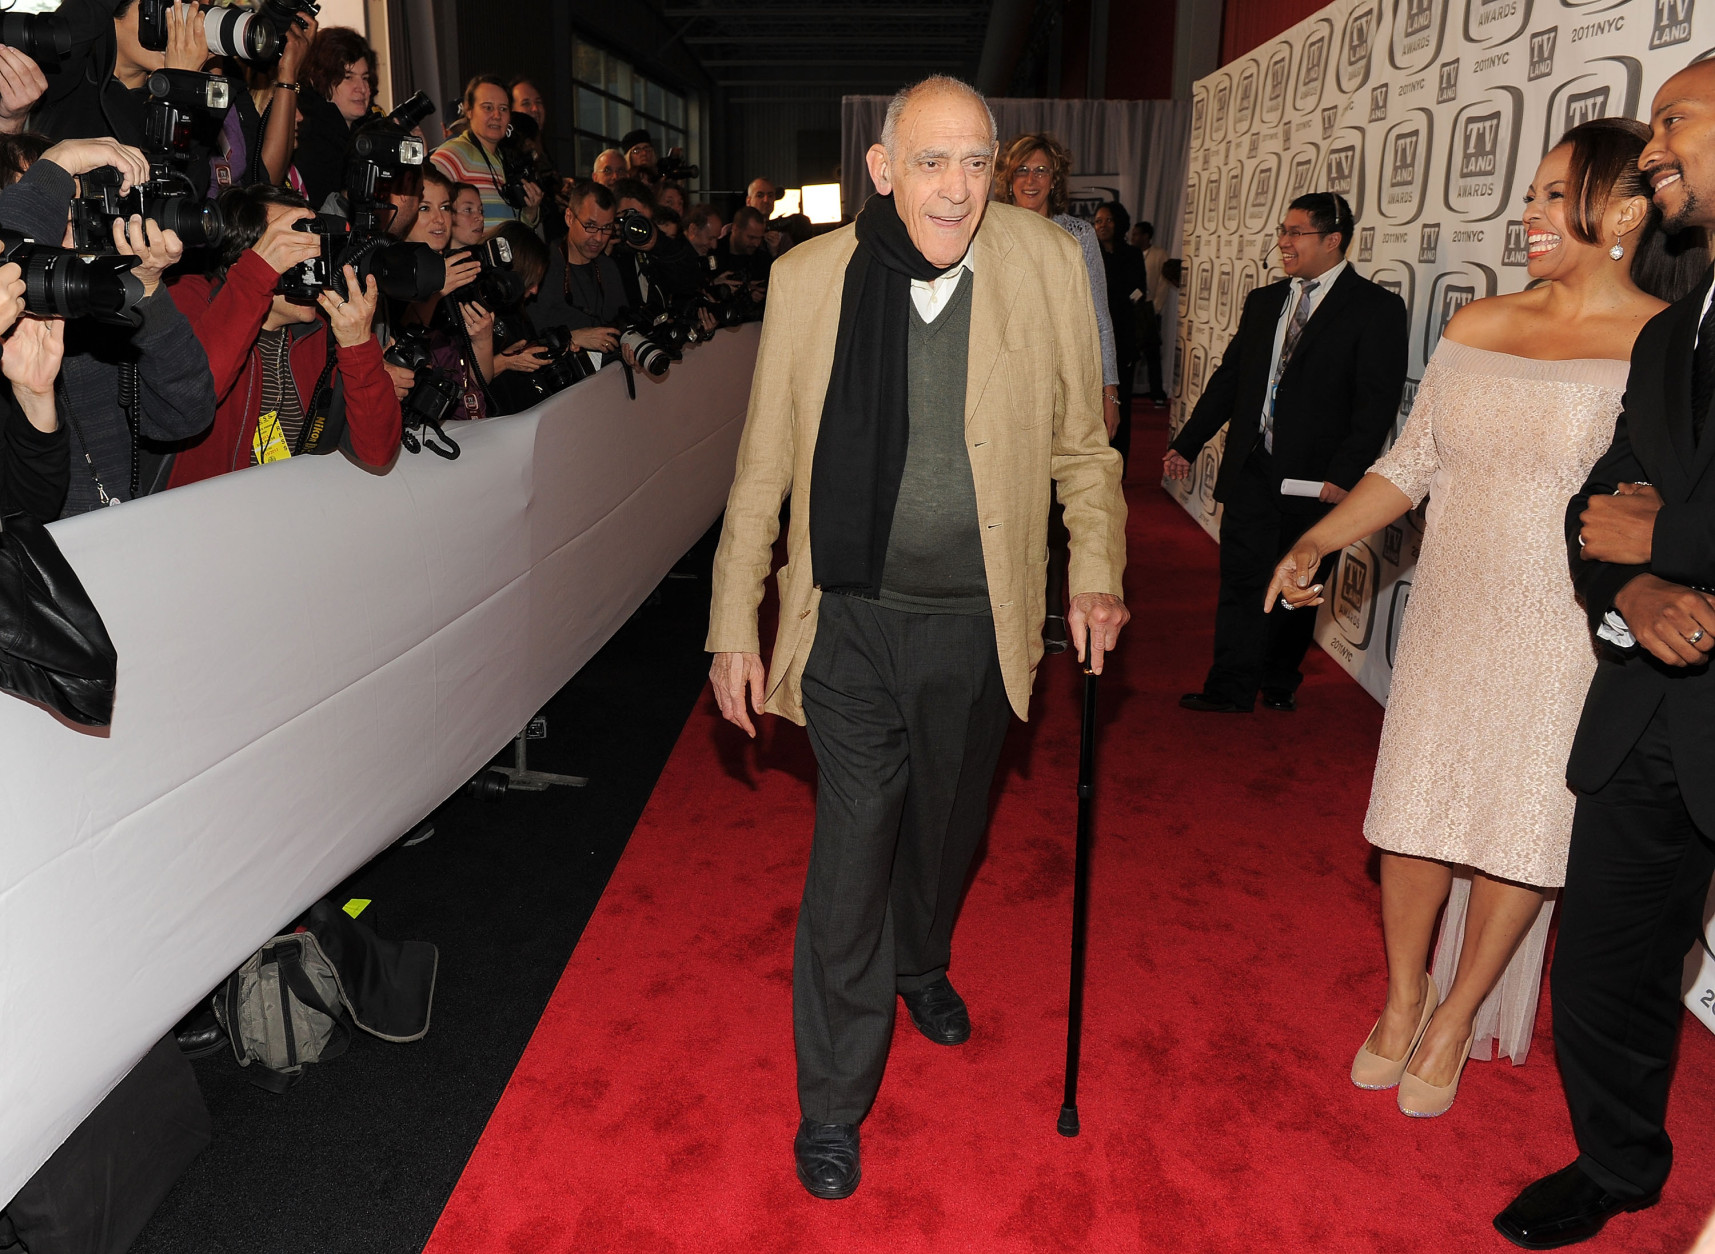 NEW YORK, NY - APRIL 10:  Actor Abe Vigoda attends the 9th Annual TV Land Awards at the Javits Center on April 10, 2011 in New York City.  (Photo by Larry Busacca/Getty Images)